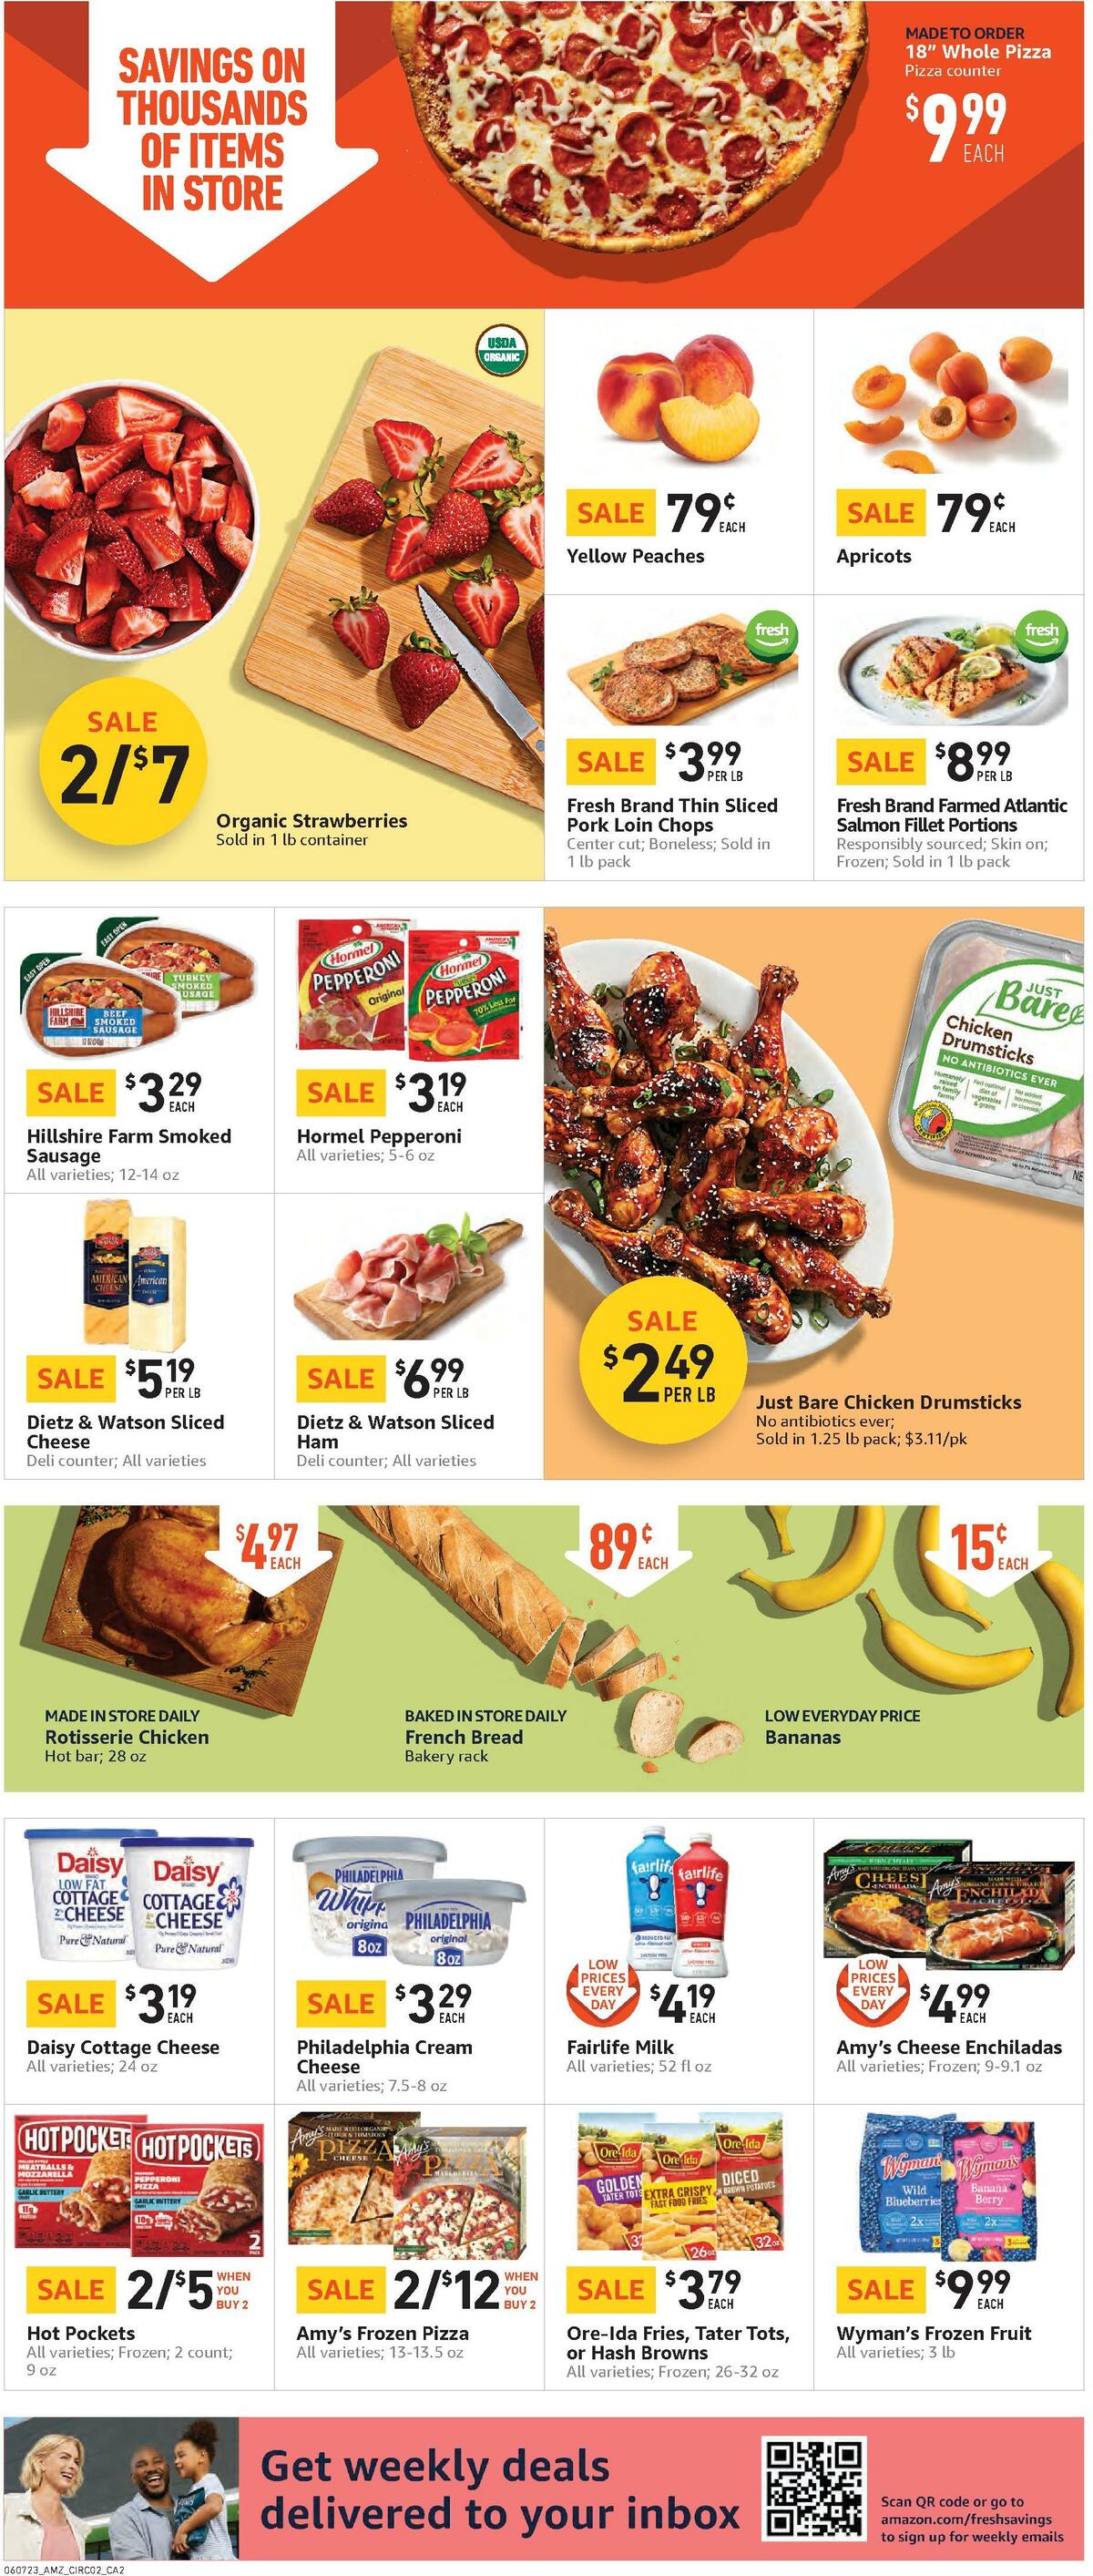 Amazon Fresh Weekly Ad from June 7